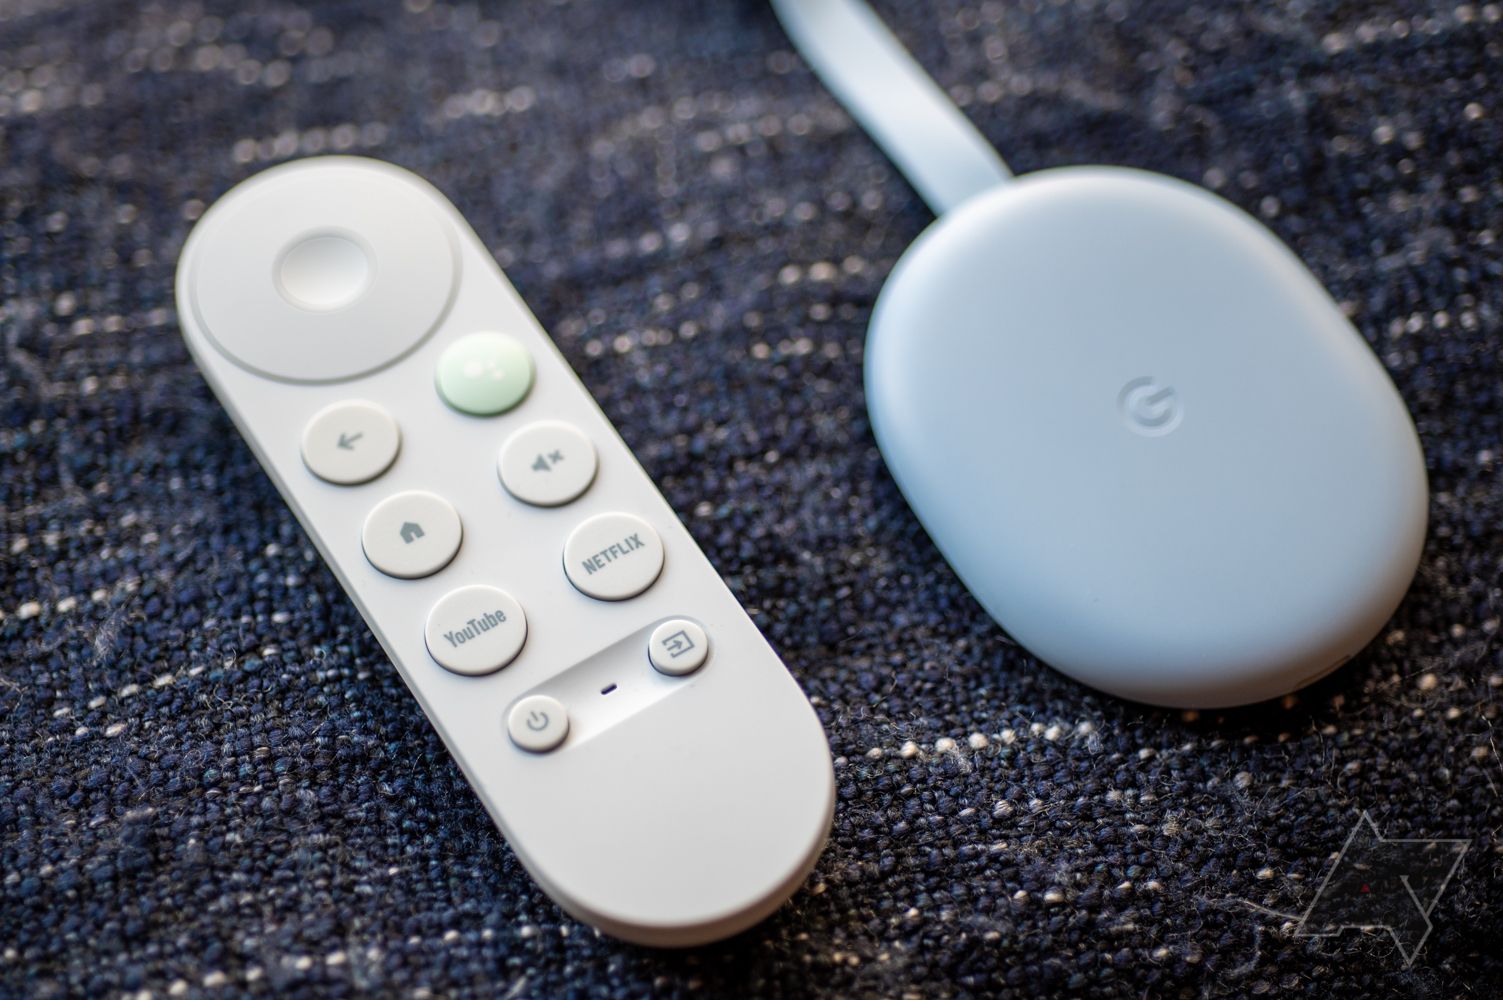 The Chromecast with Google TV just got a new security update that's 